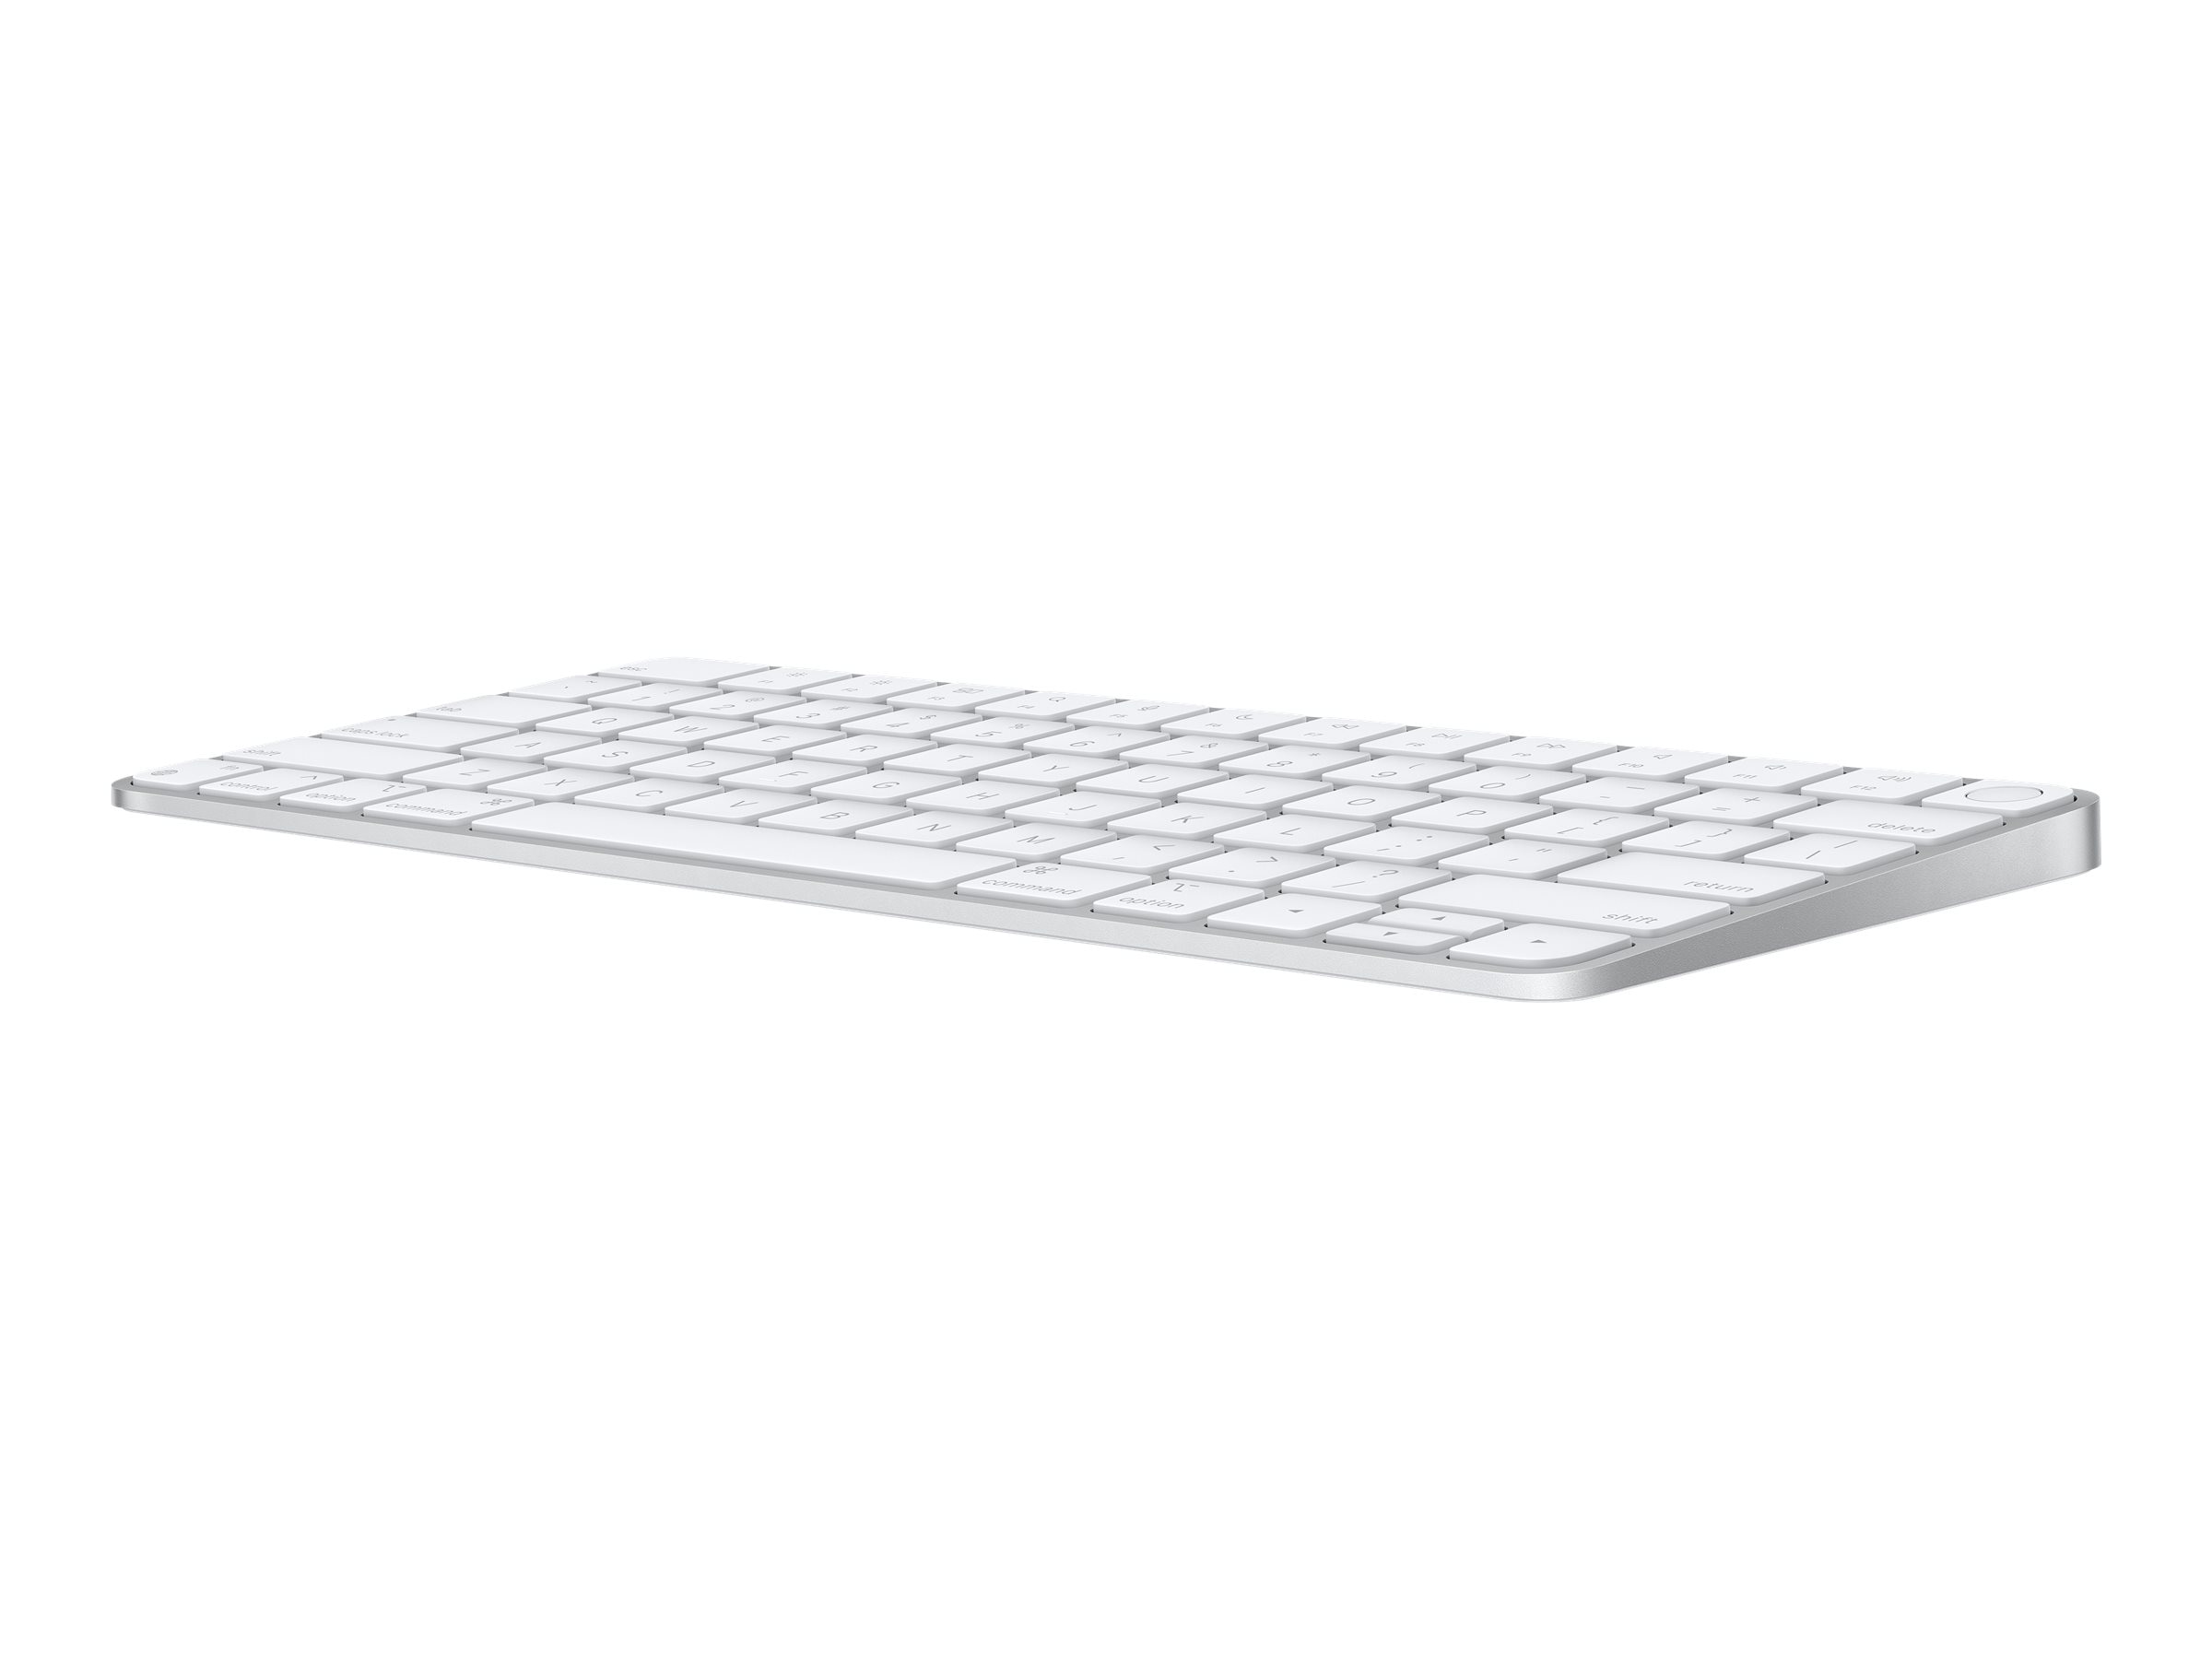 Buy Apple Magic Keyboard with Touch ID for Mac models with Apple